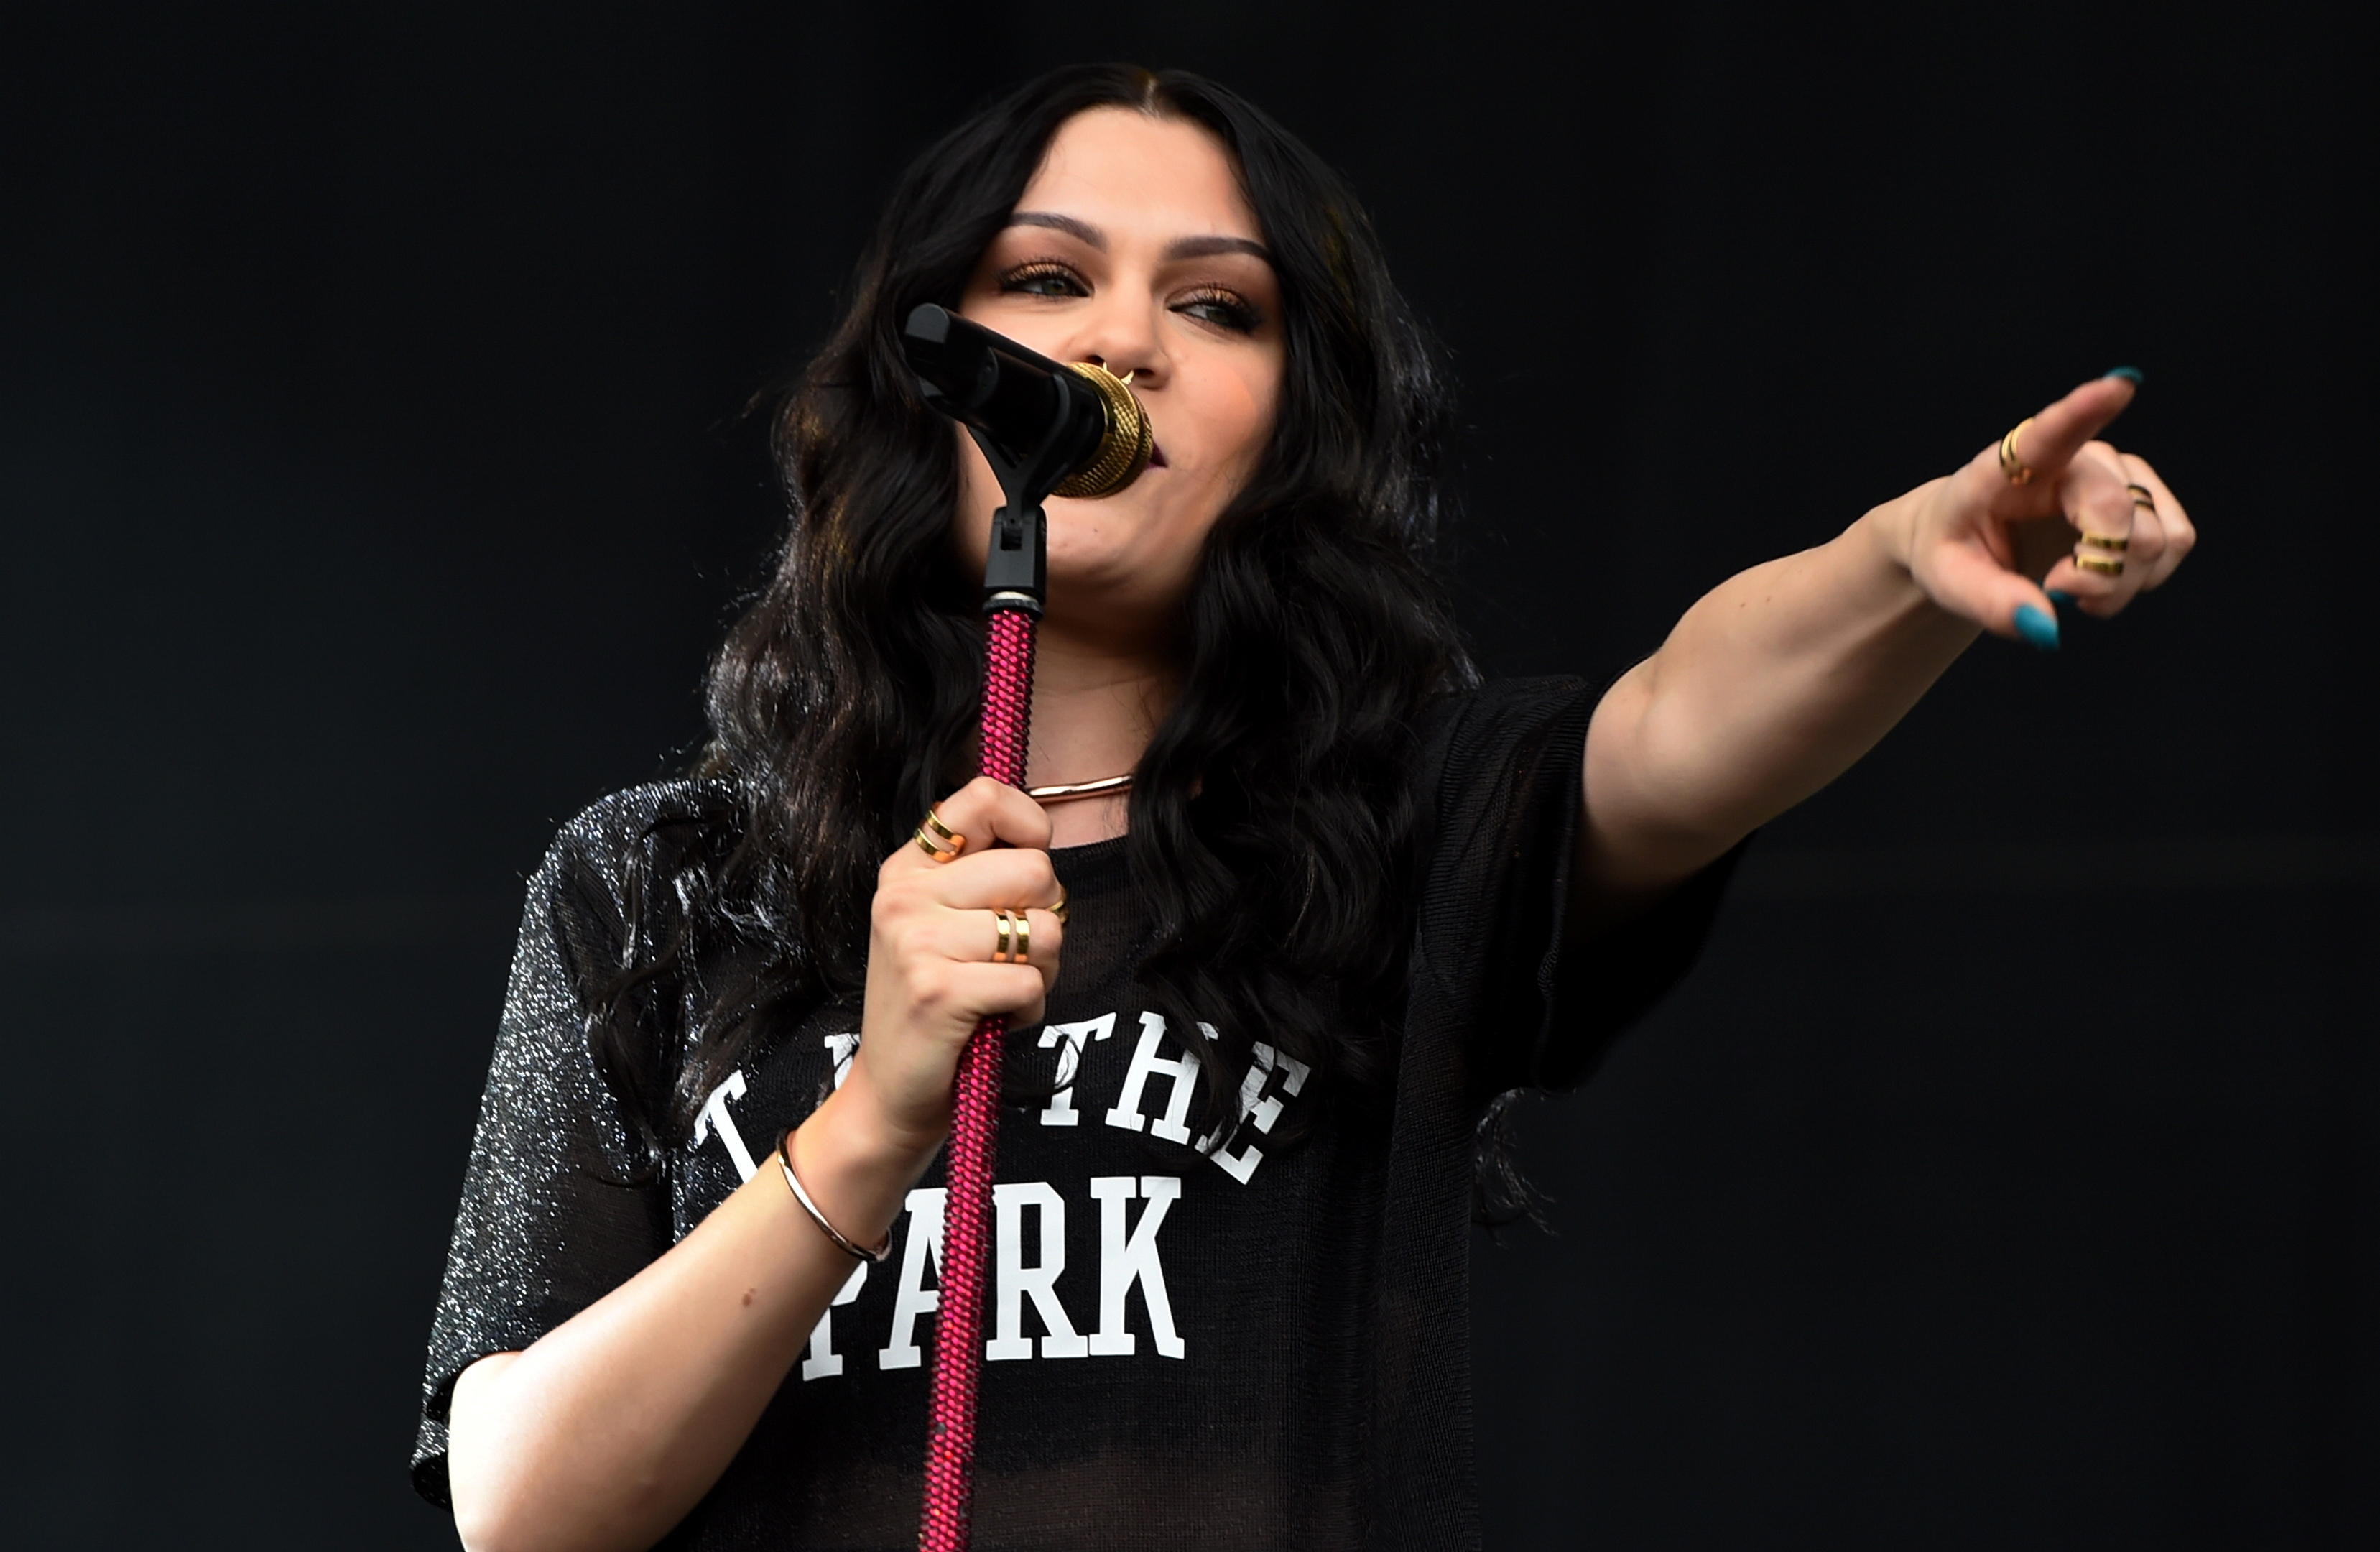  Jessie J in full T in the Park gear. Picture by Kenny Elrick.   